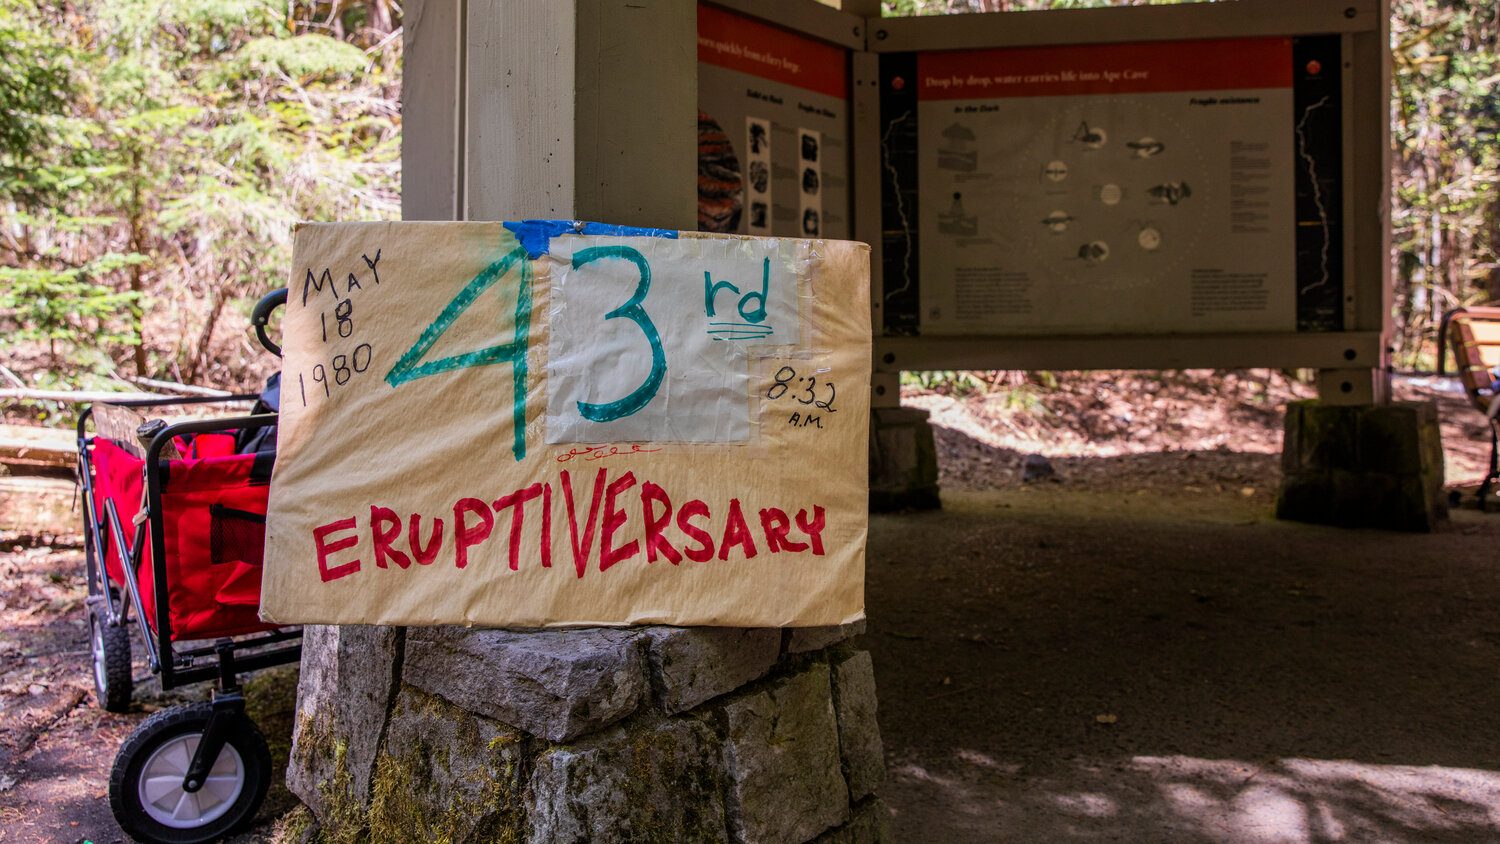 A sign honors the ‘43rd Eruptiversary,” of Mount St. Helens at the Ape Cave Interpretive Site in Cougar on opening day Thursday, May 18.